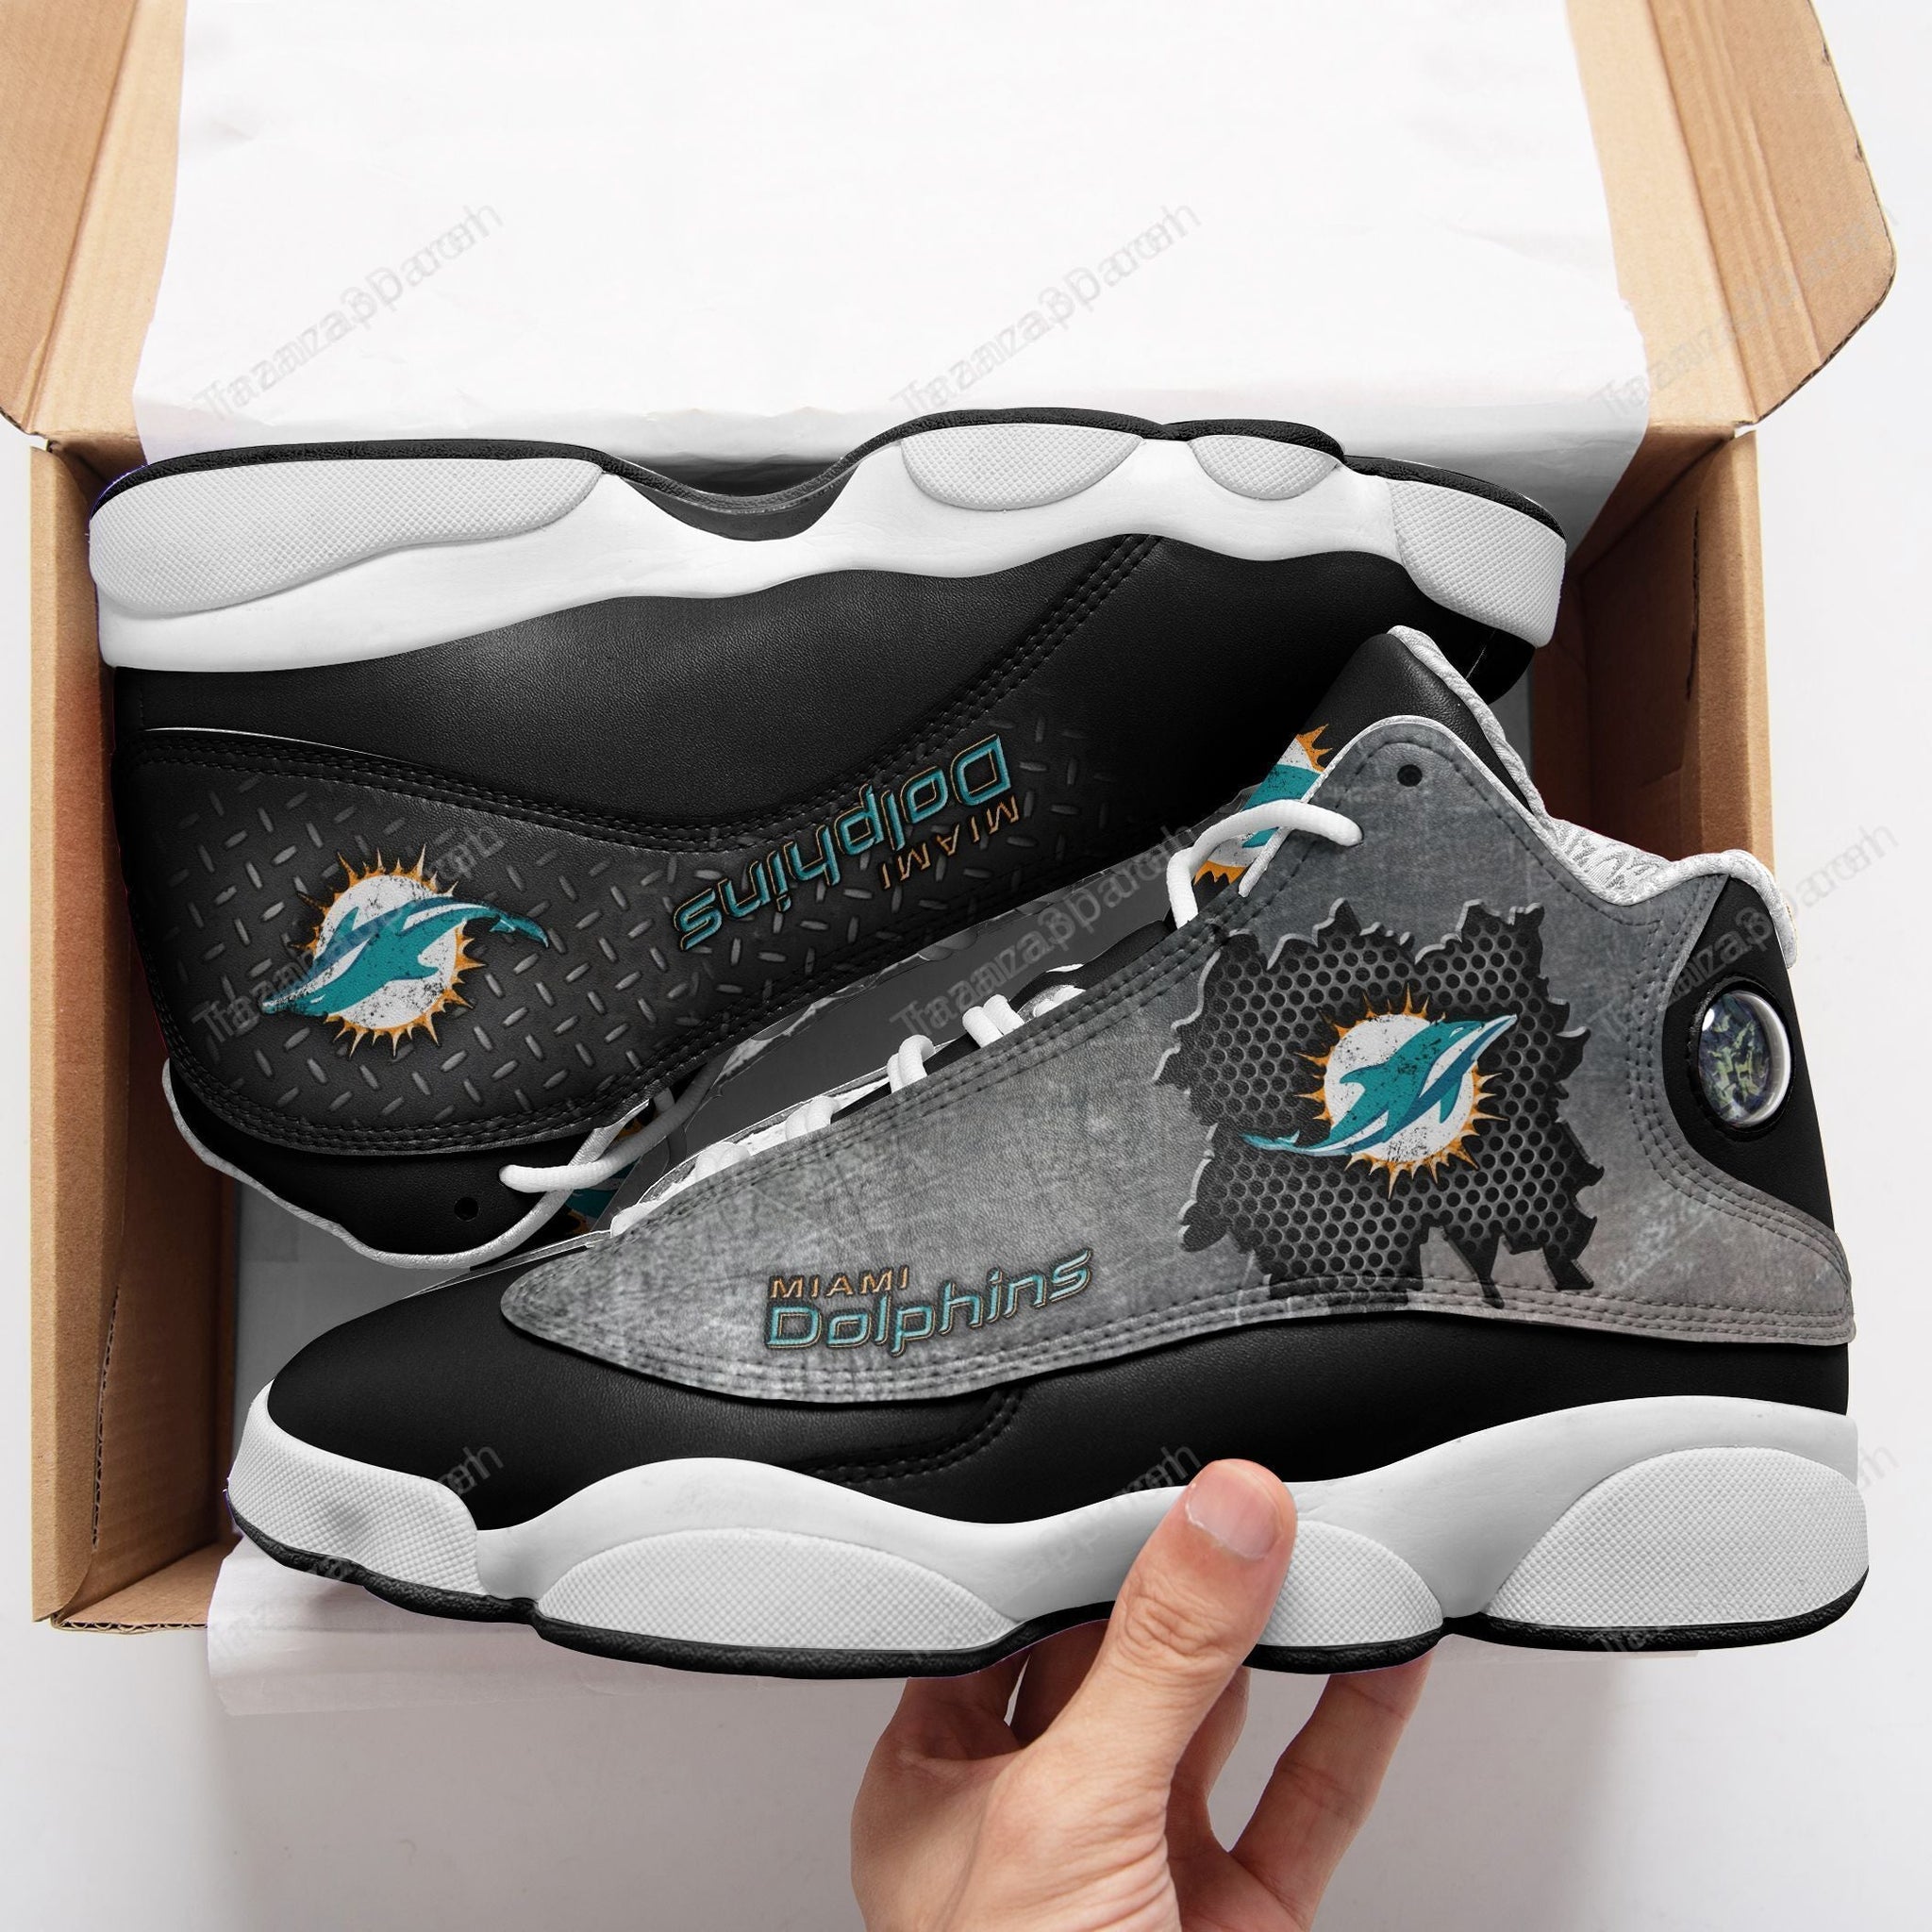 Miami Dolphins Custom Shoes Sneakers 213-Gear Wanta